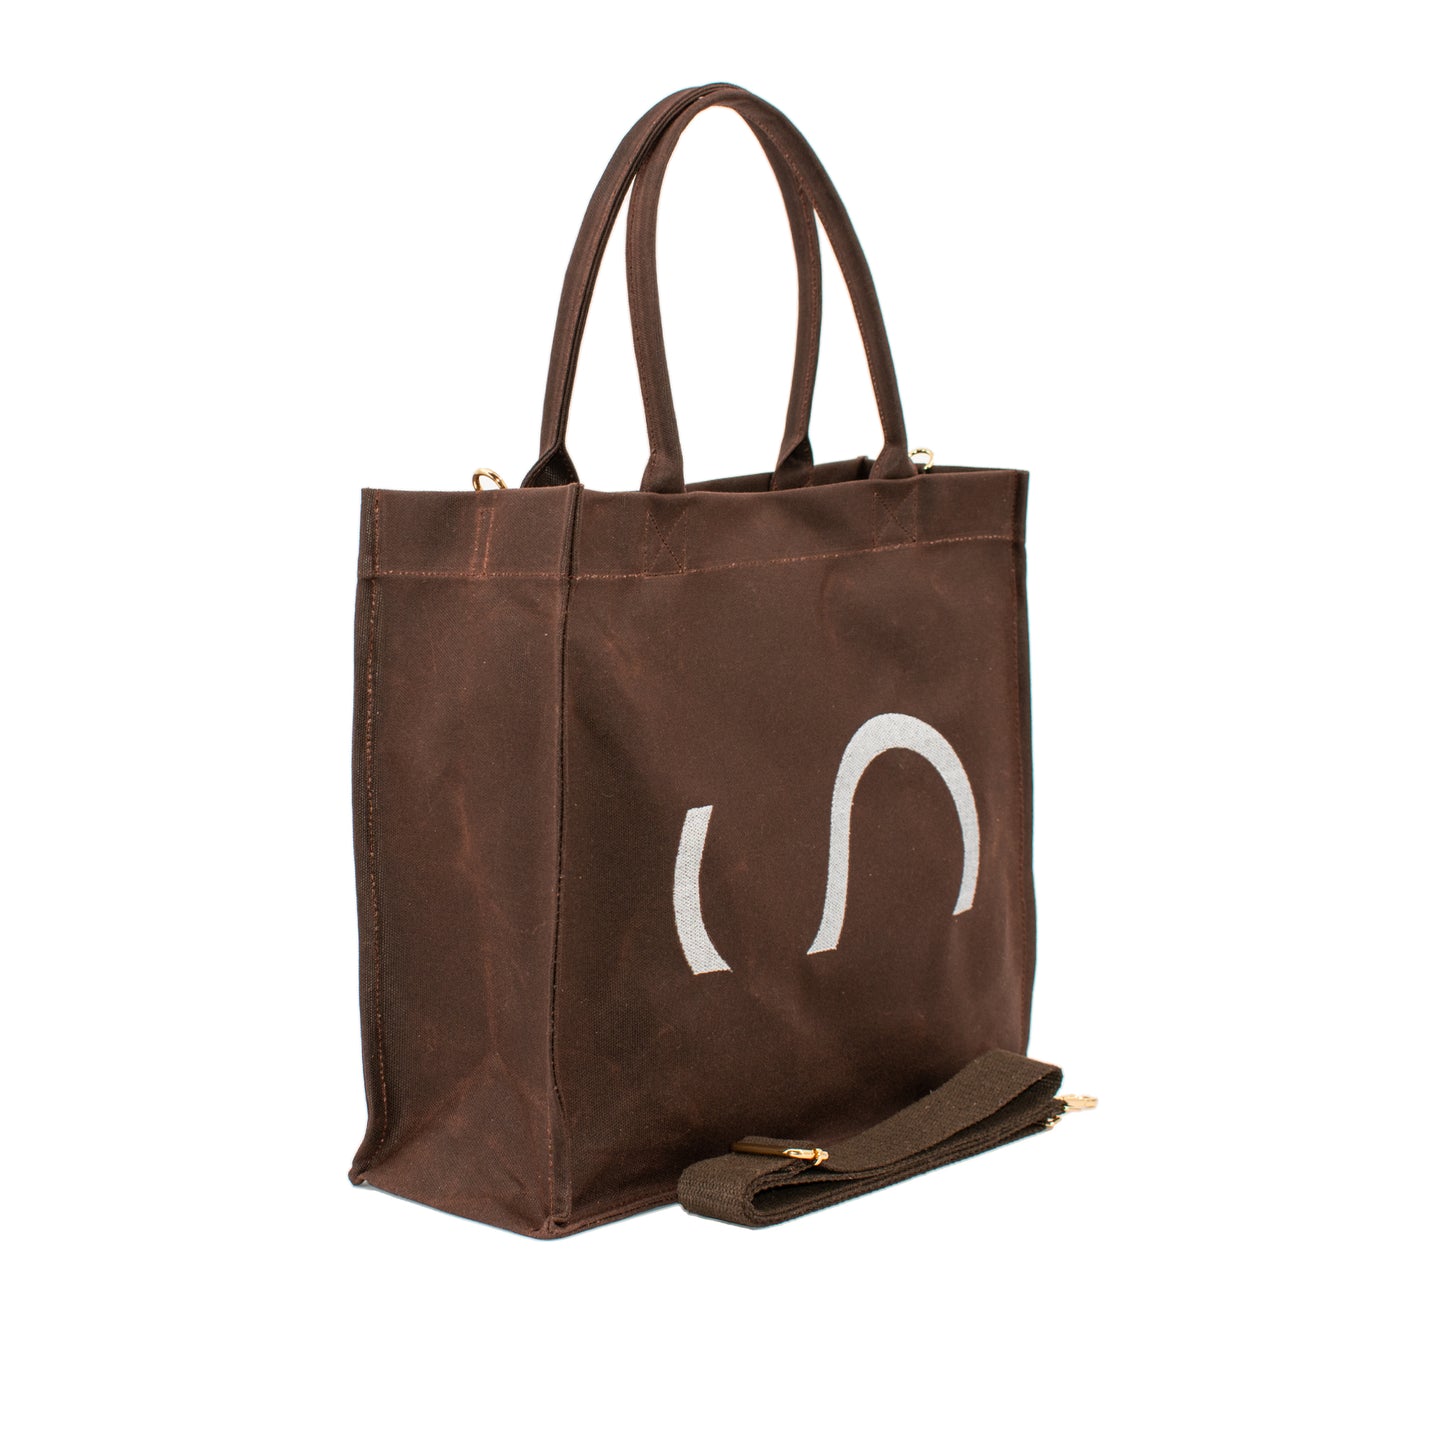 HCANSS WAXED CANVAS CHOCOLATE LARGE TOTE BAG